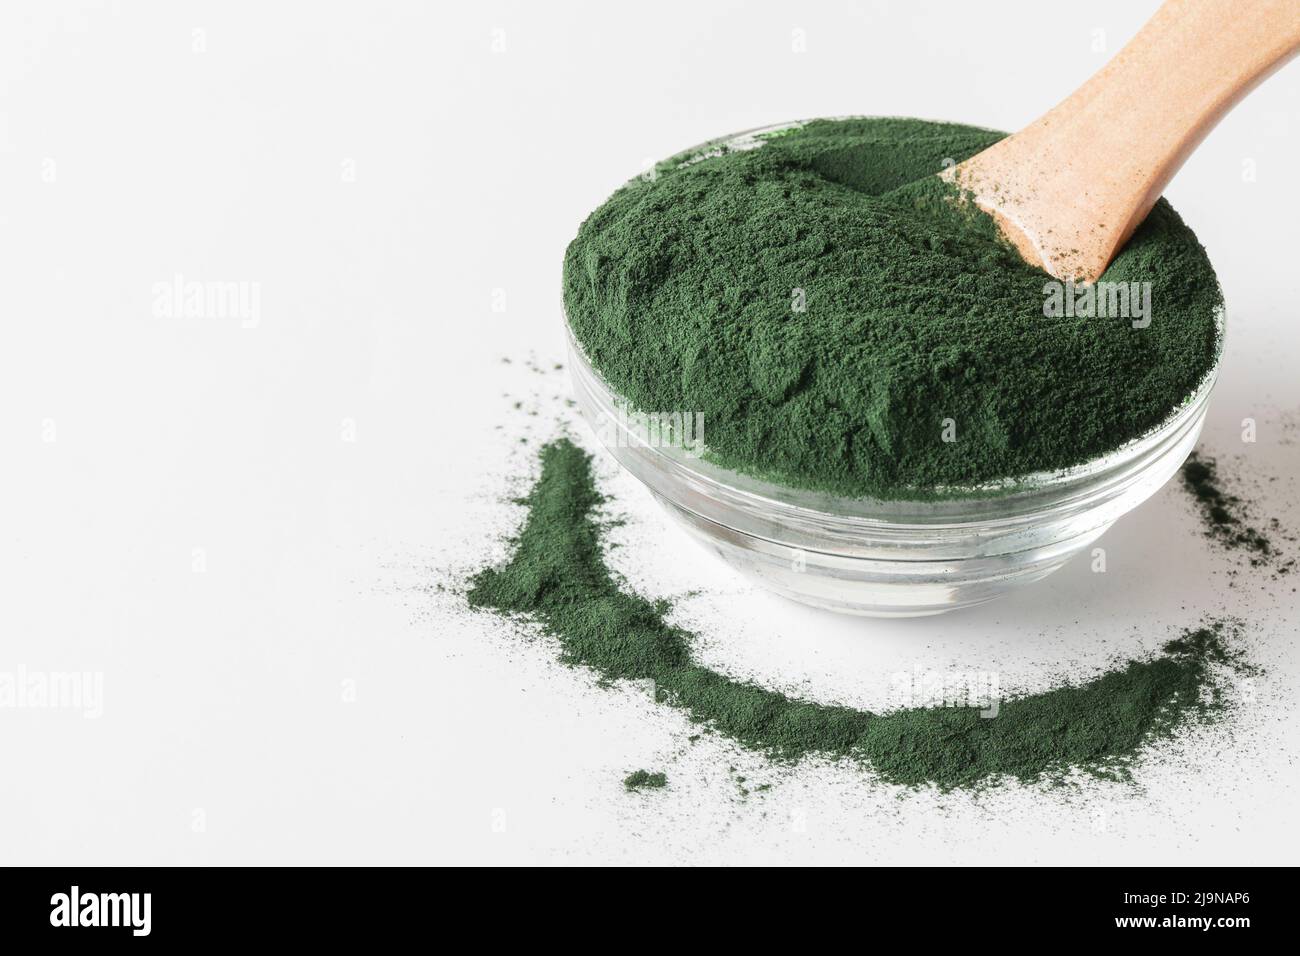 natural additives and superfood. green spirulina algae powder in glass with wood spoon on white background. healthy lifestyle concept. organic food  Stock Photo